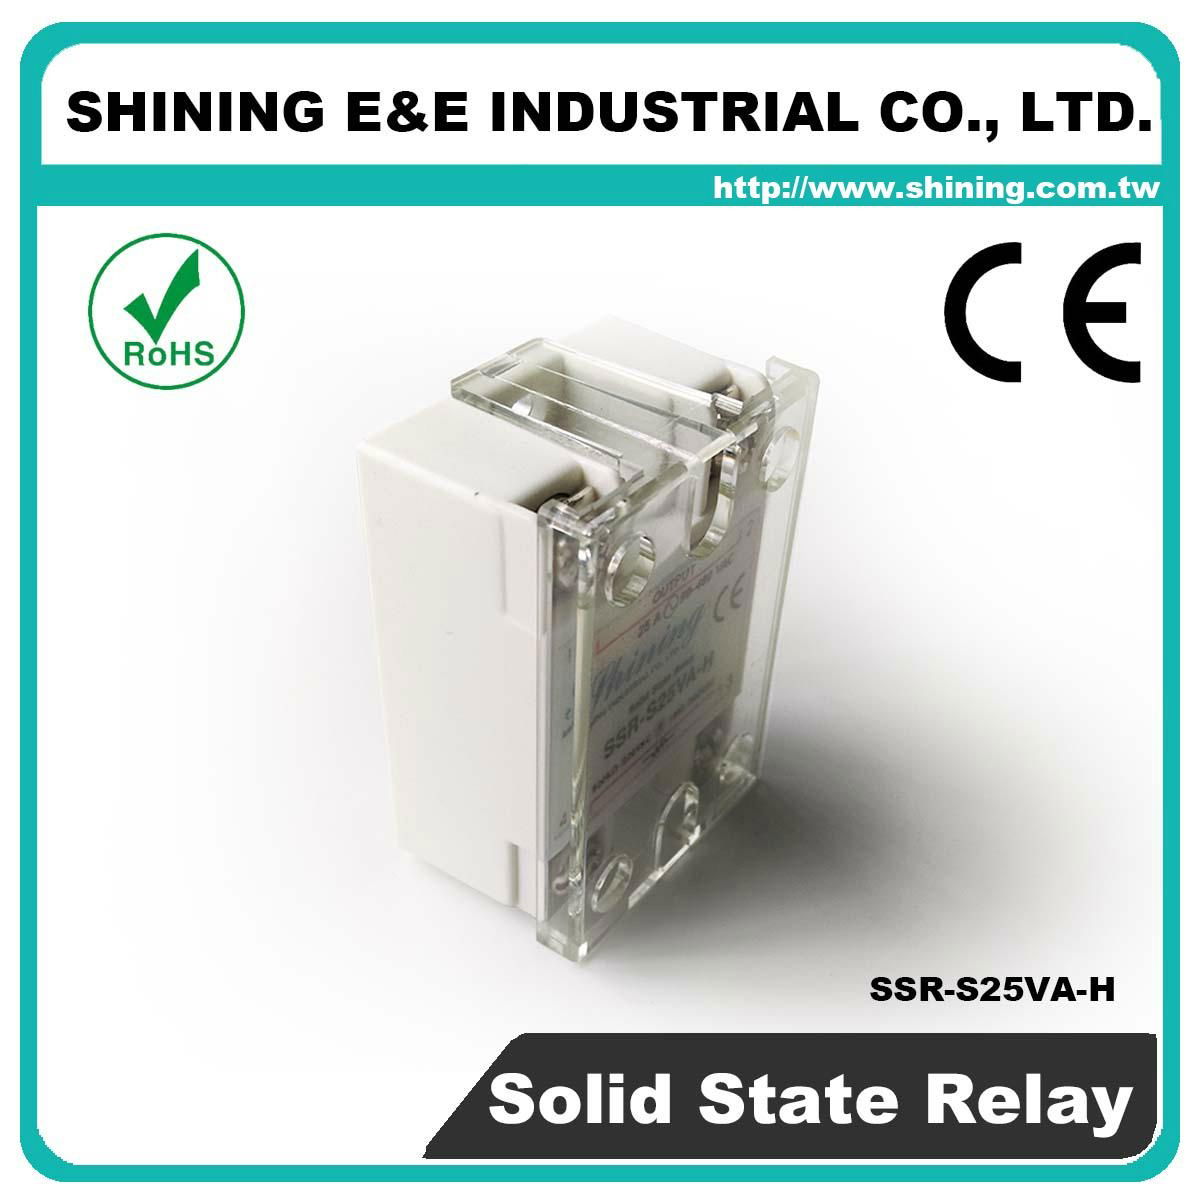 SSR-S25VA-H VR to AC Phase Control Adjustable Solid State Relays 5